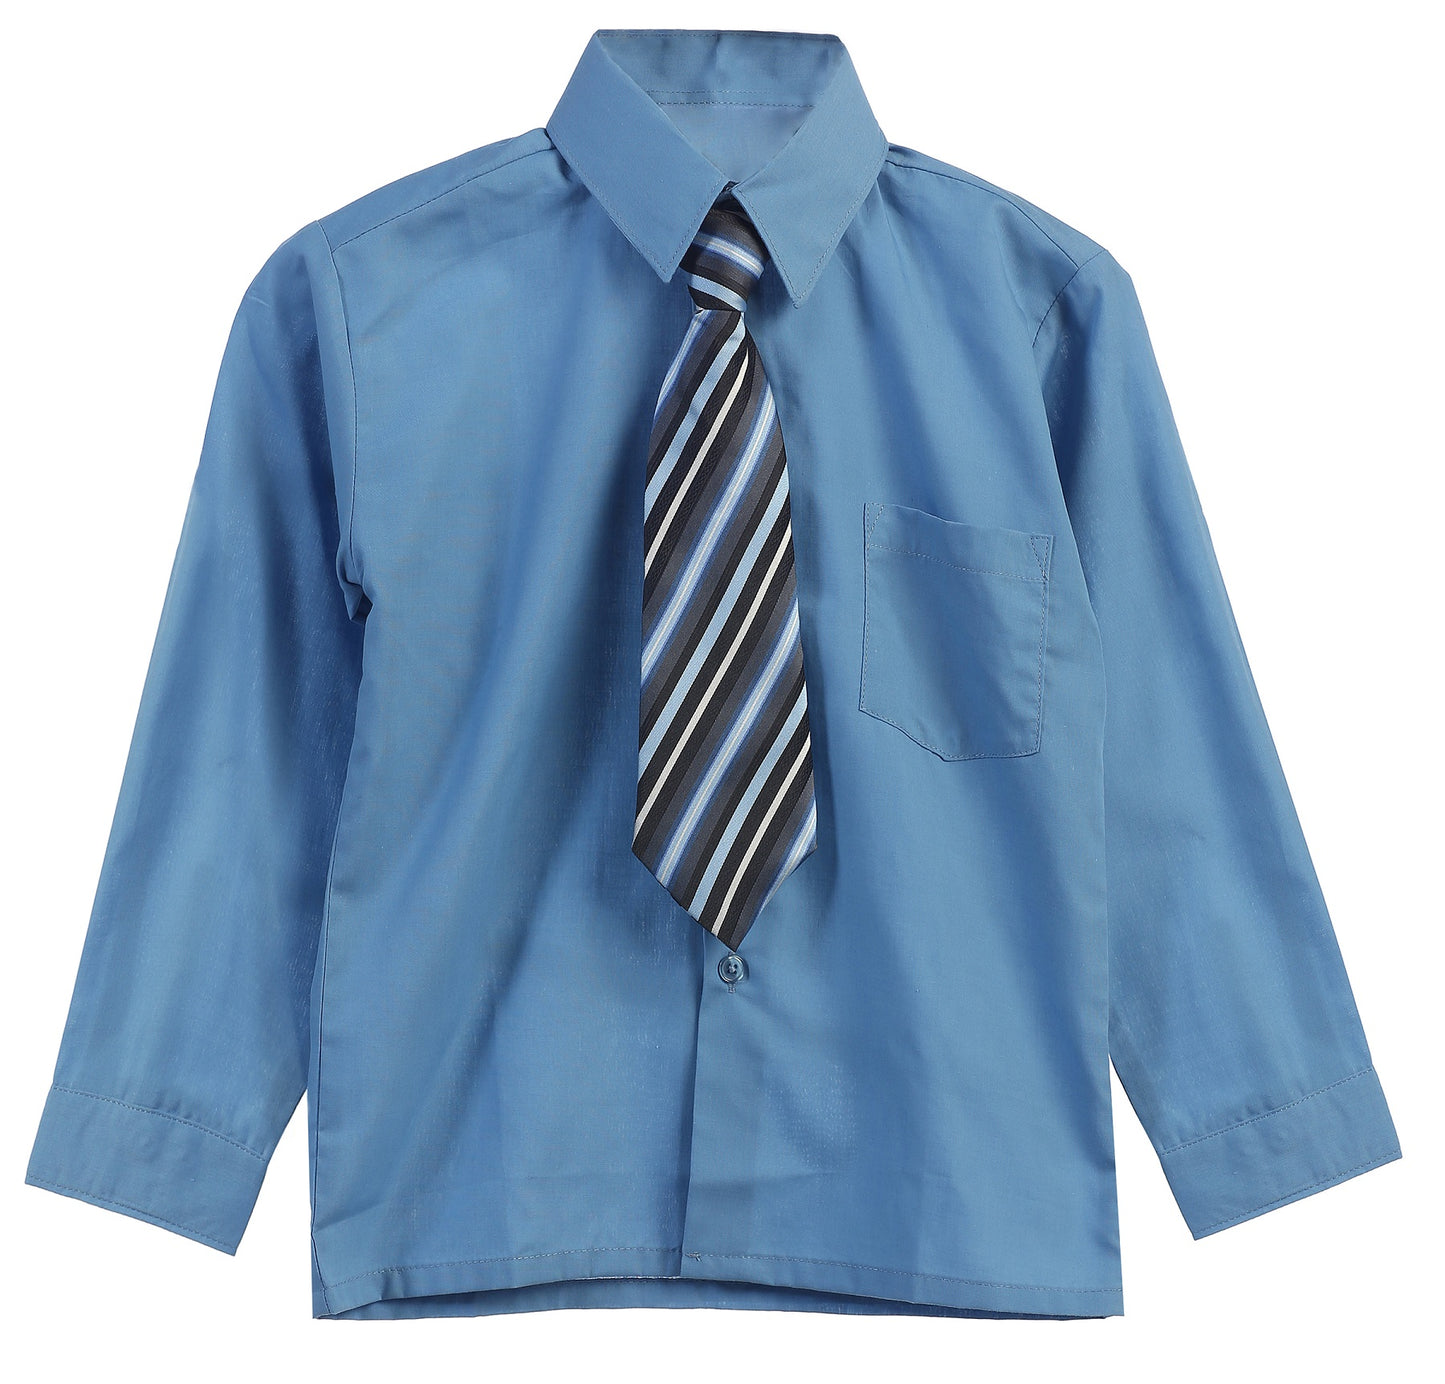 Boys Solid Long Sleeve Dress Shirt With Tie -Crystal Blue